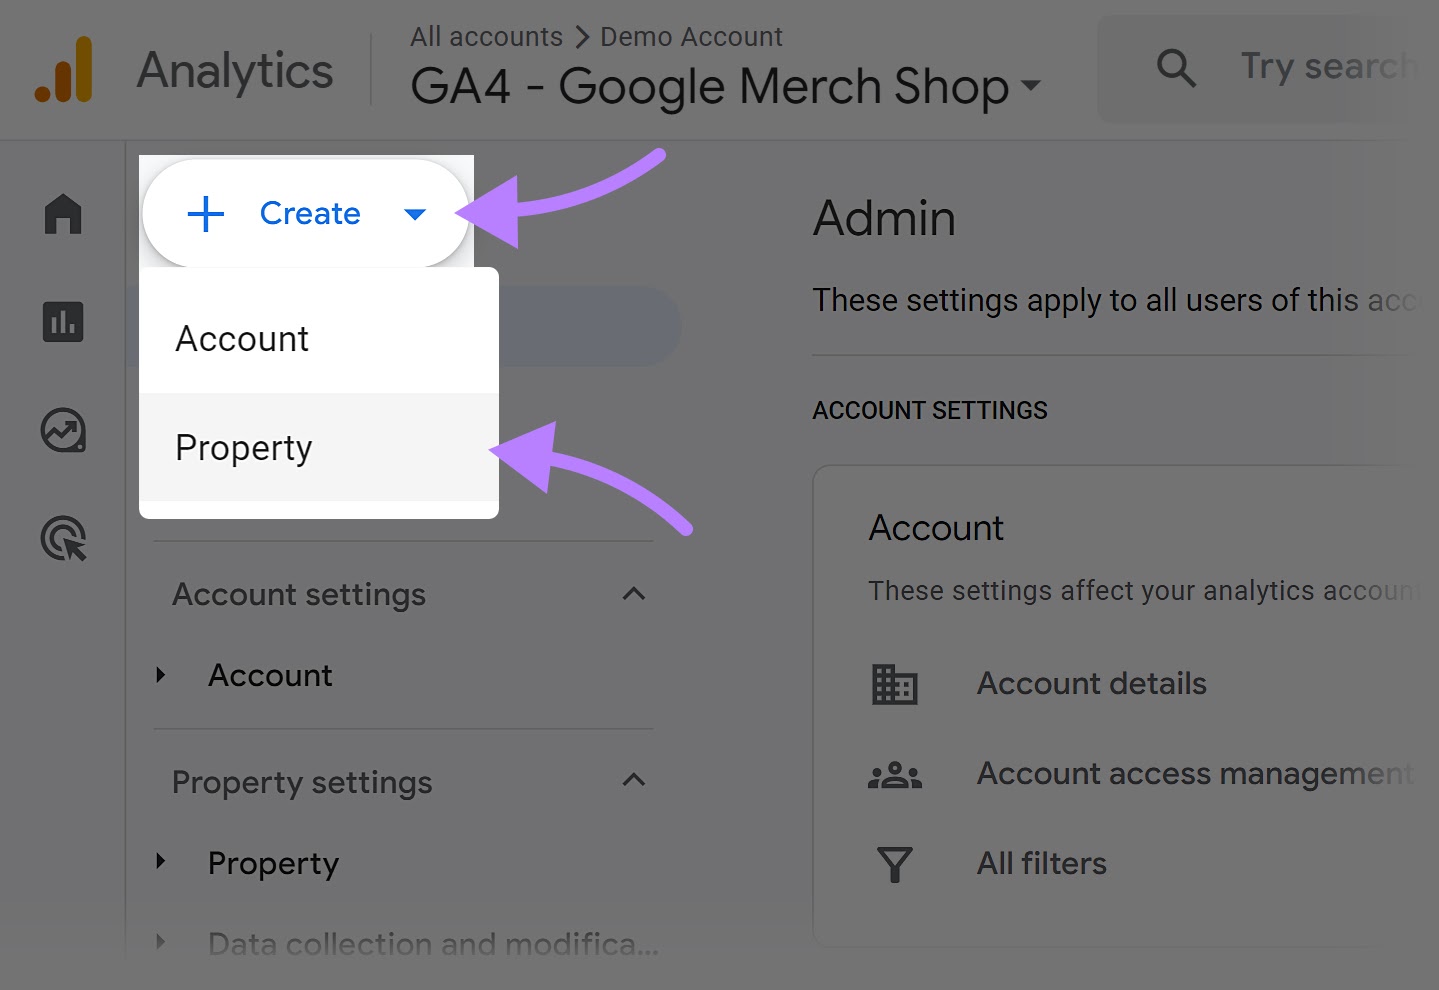 "Create" and "Property" buttons selected